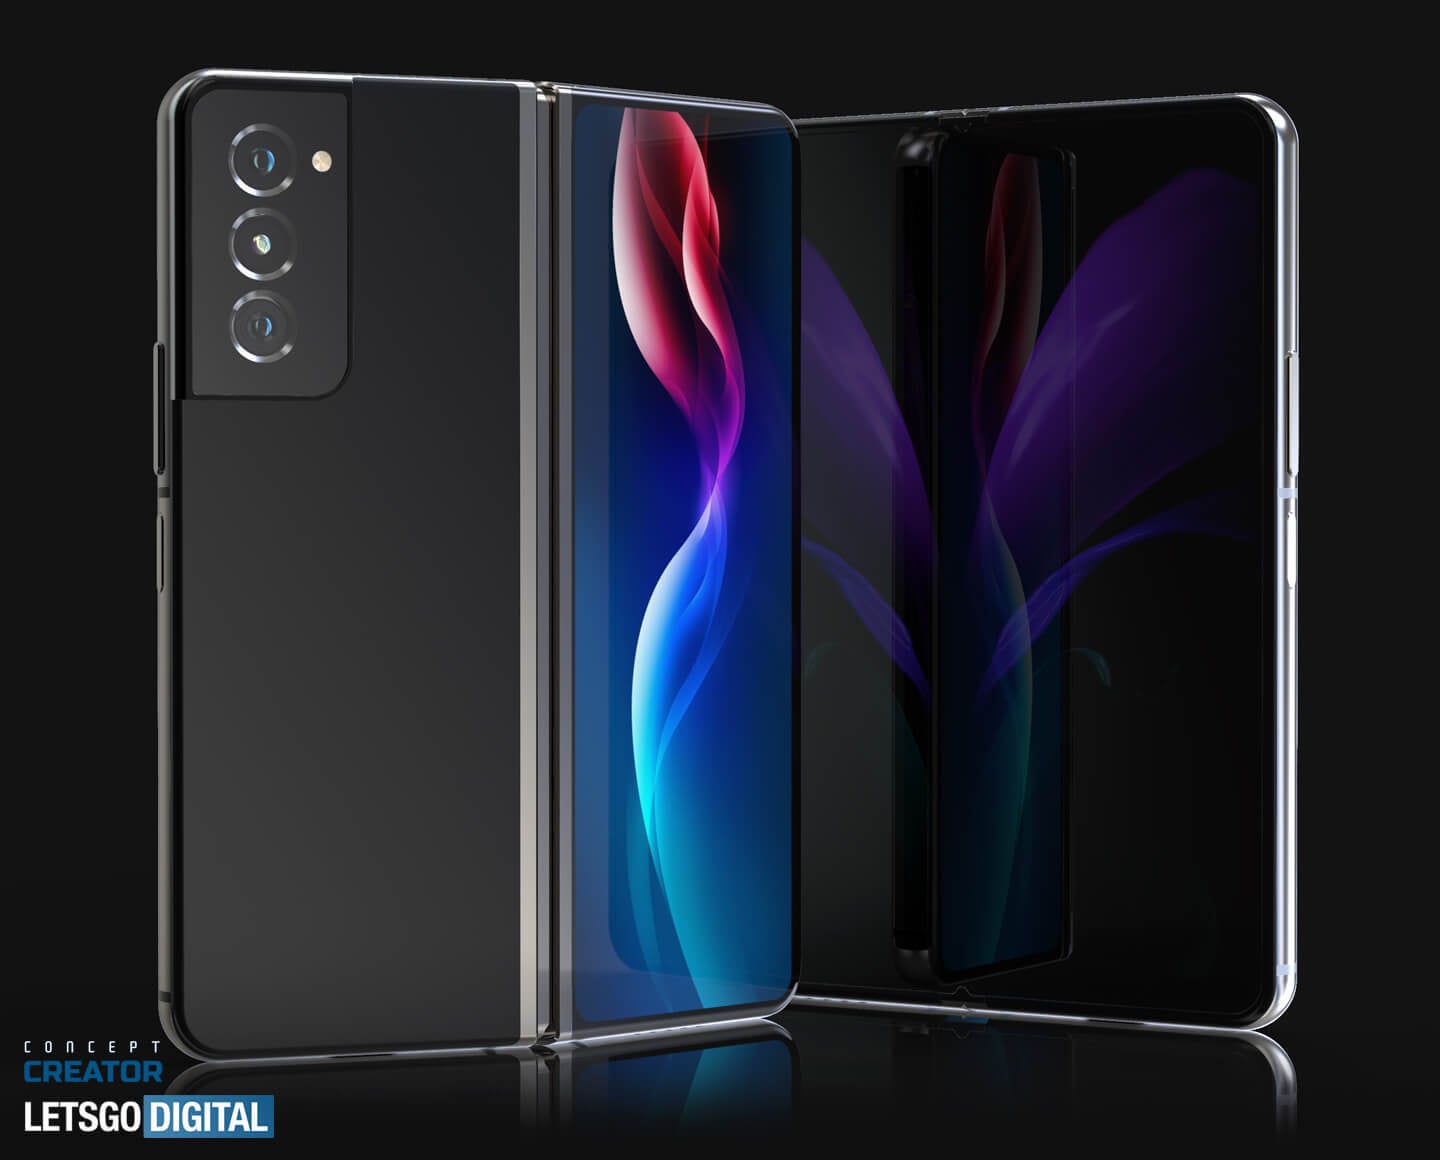 Samsung Galaxy Z Fold 3 concept render - Check out these Samsung Galaxy Z Fold 3 concept renders